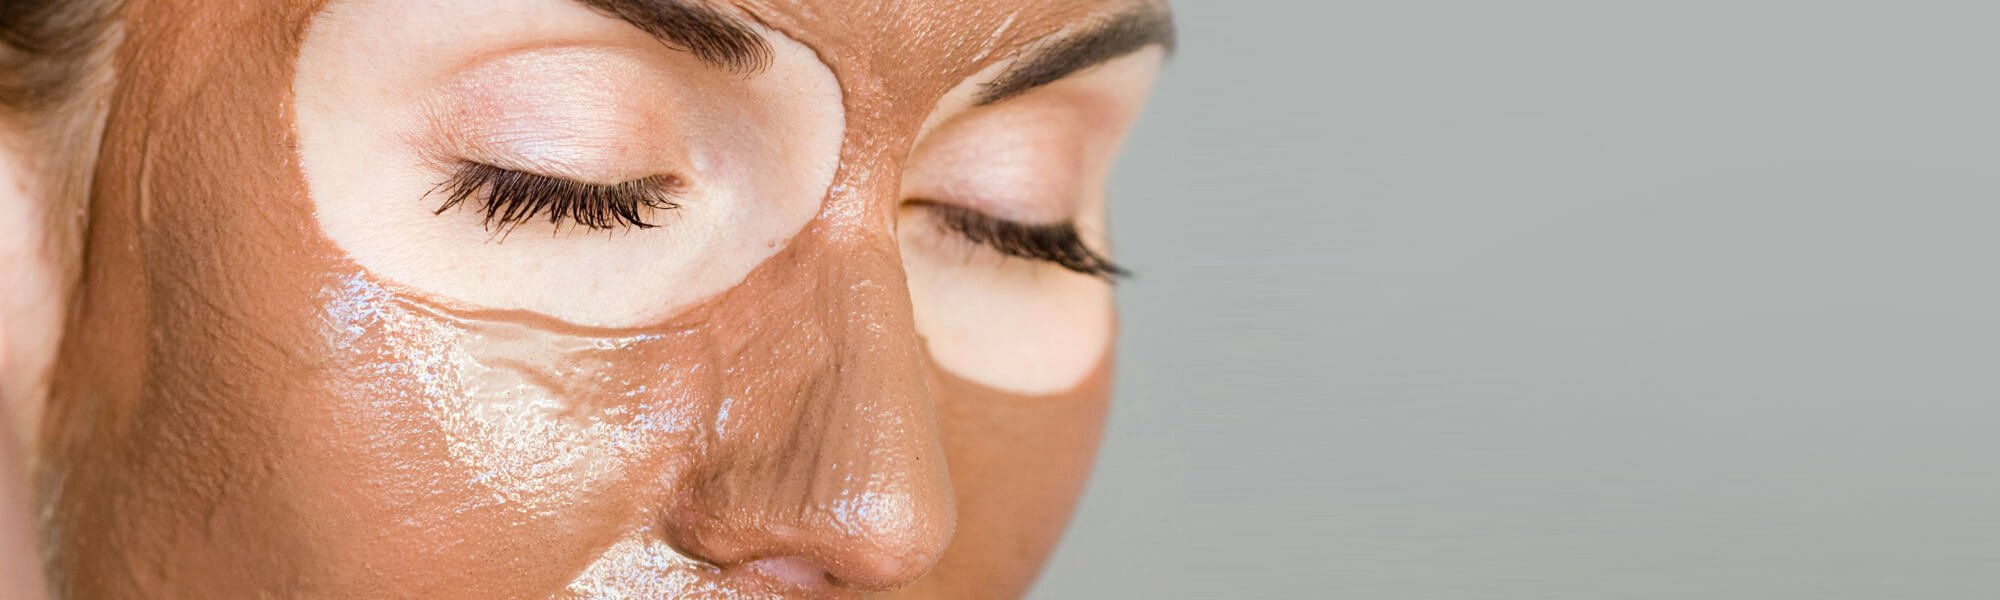 Ready To Join The Face Mask Craze Article